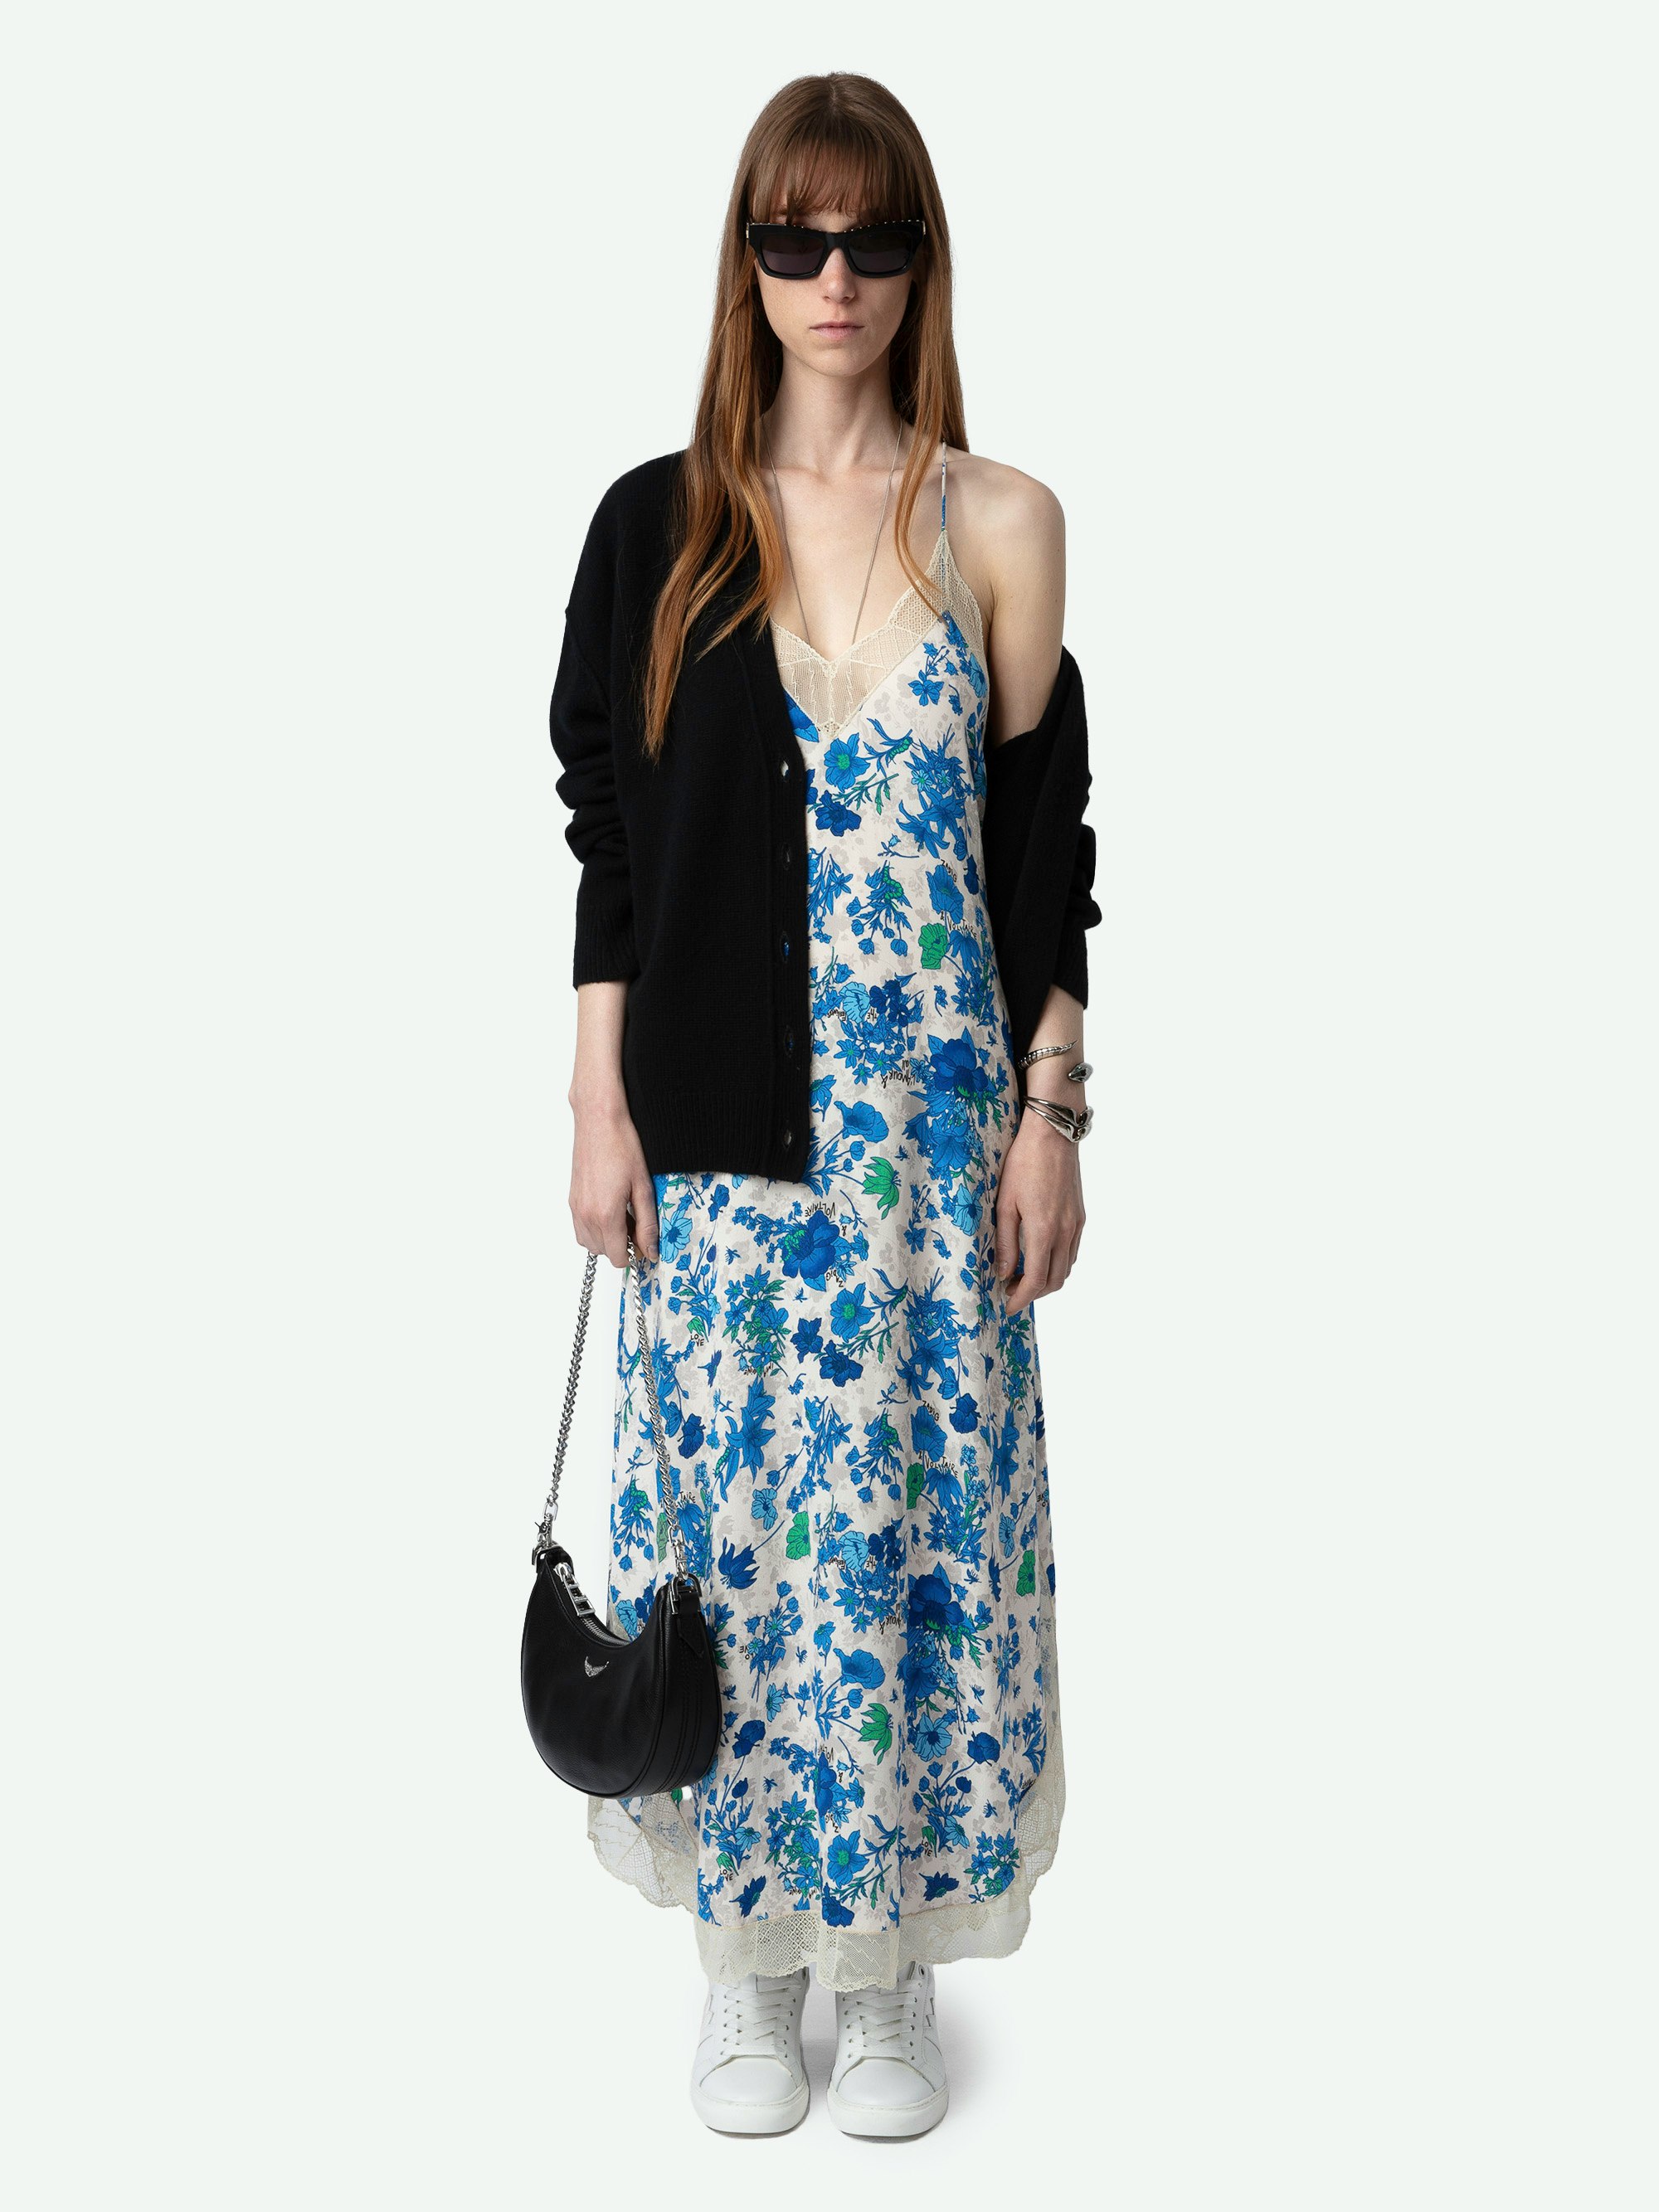 Ristyl Dress - Ecru lingerie-style maxi dress with Garden Flowers floral print, straps and lace trim.